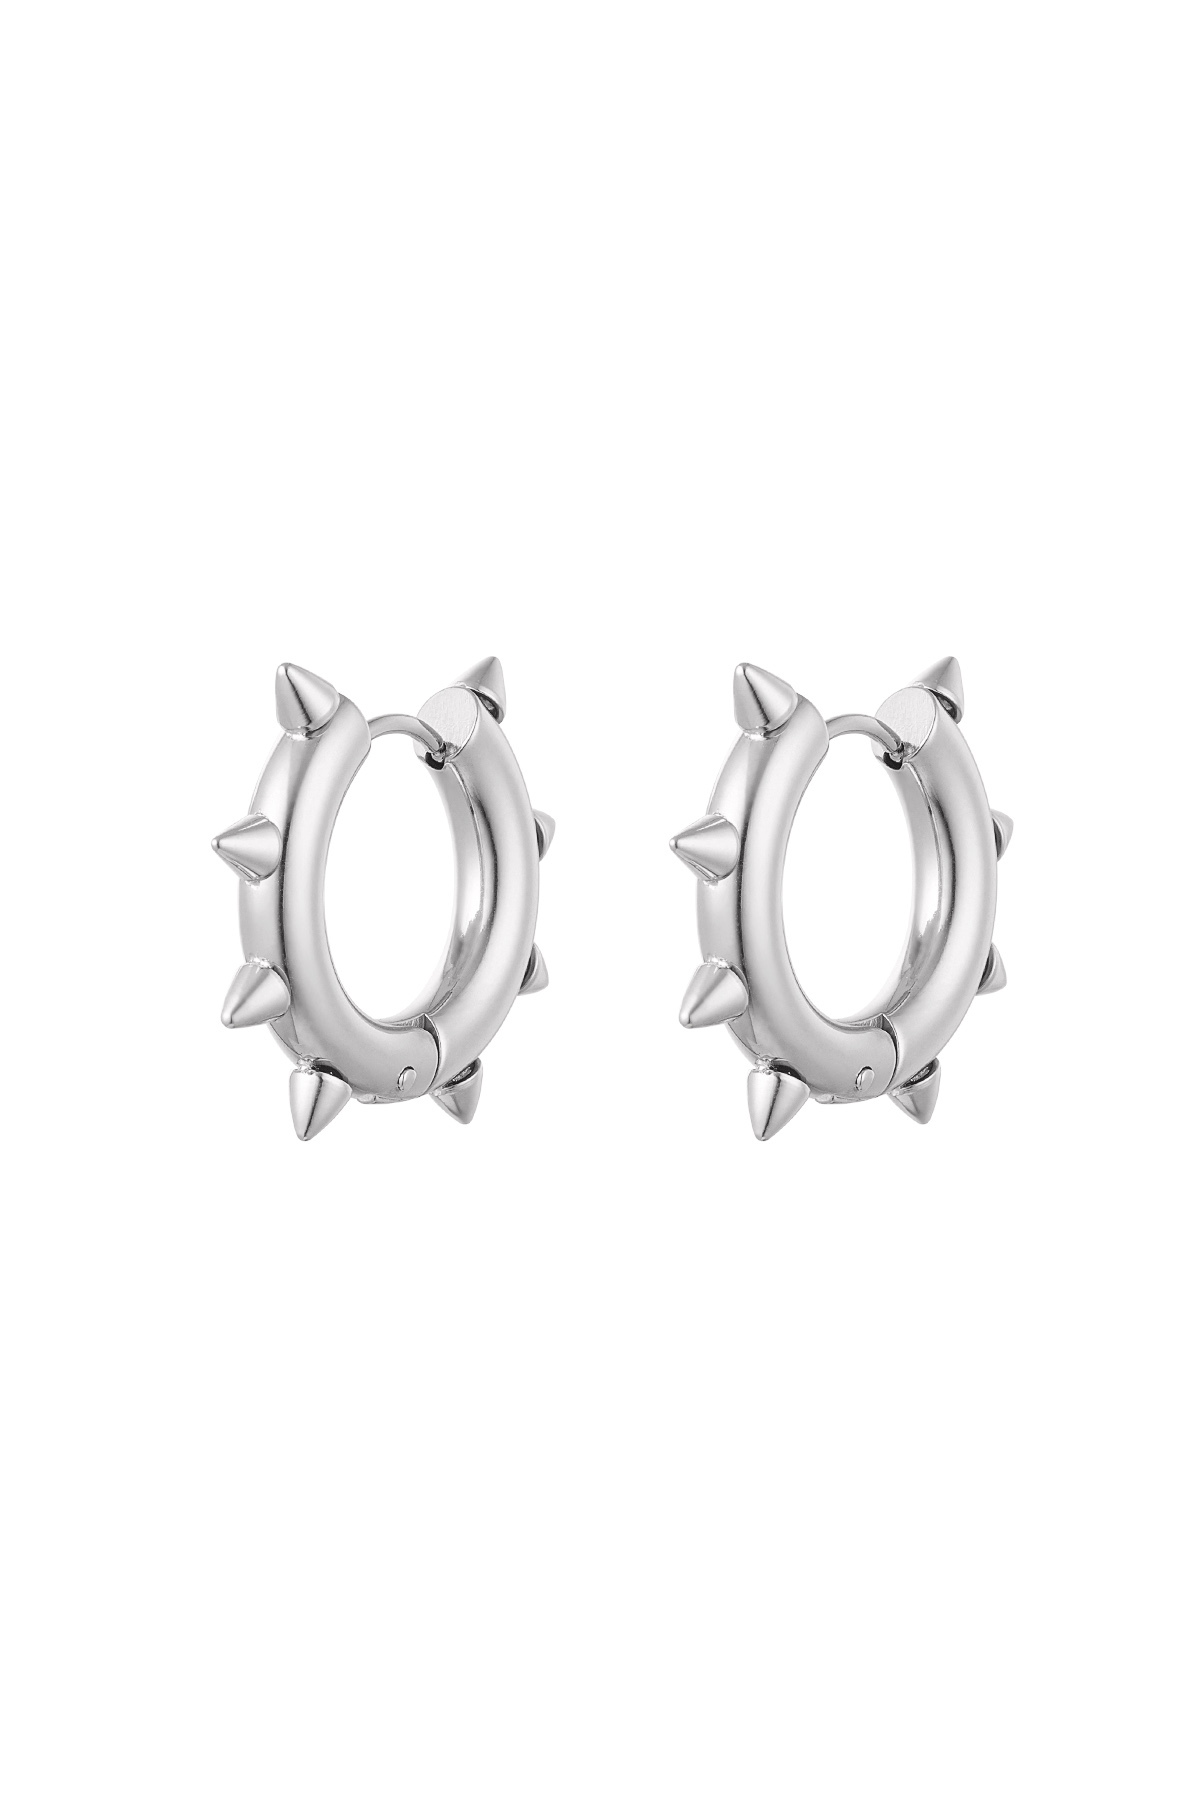 Earrings round spikes large - silver Stainless Steel